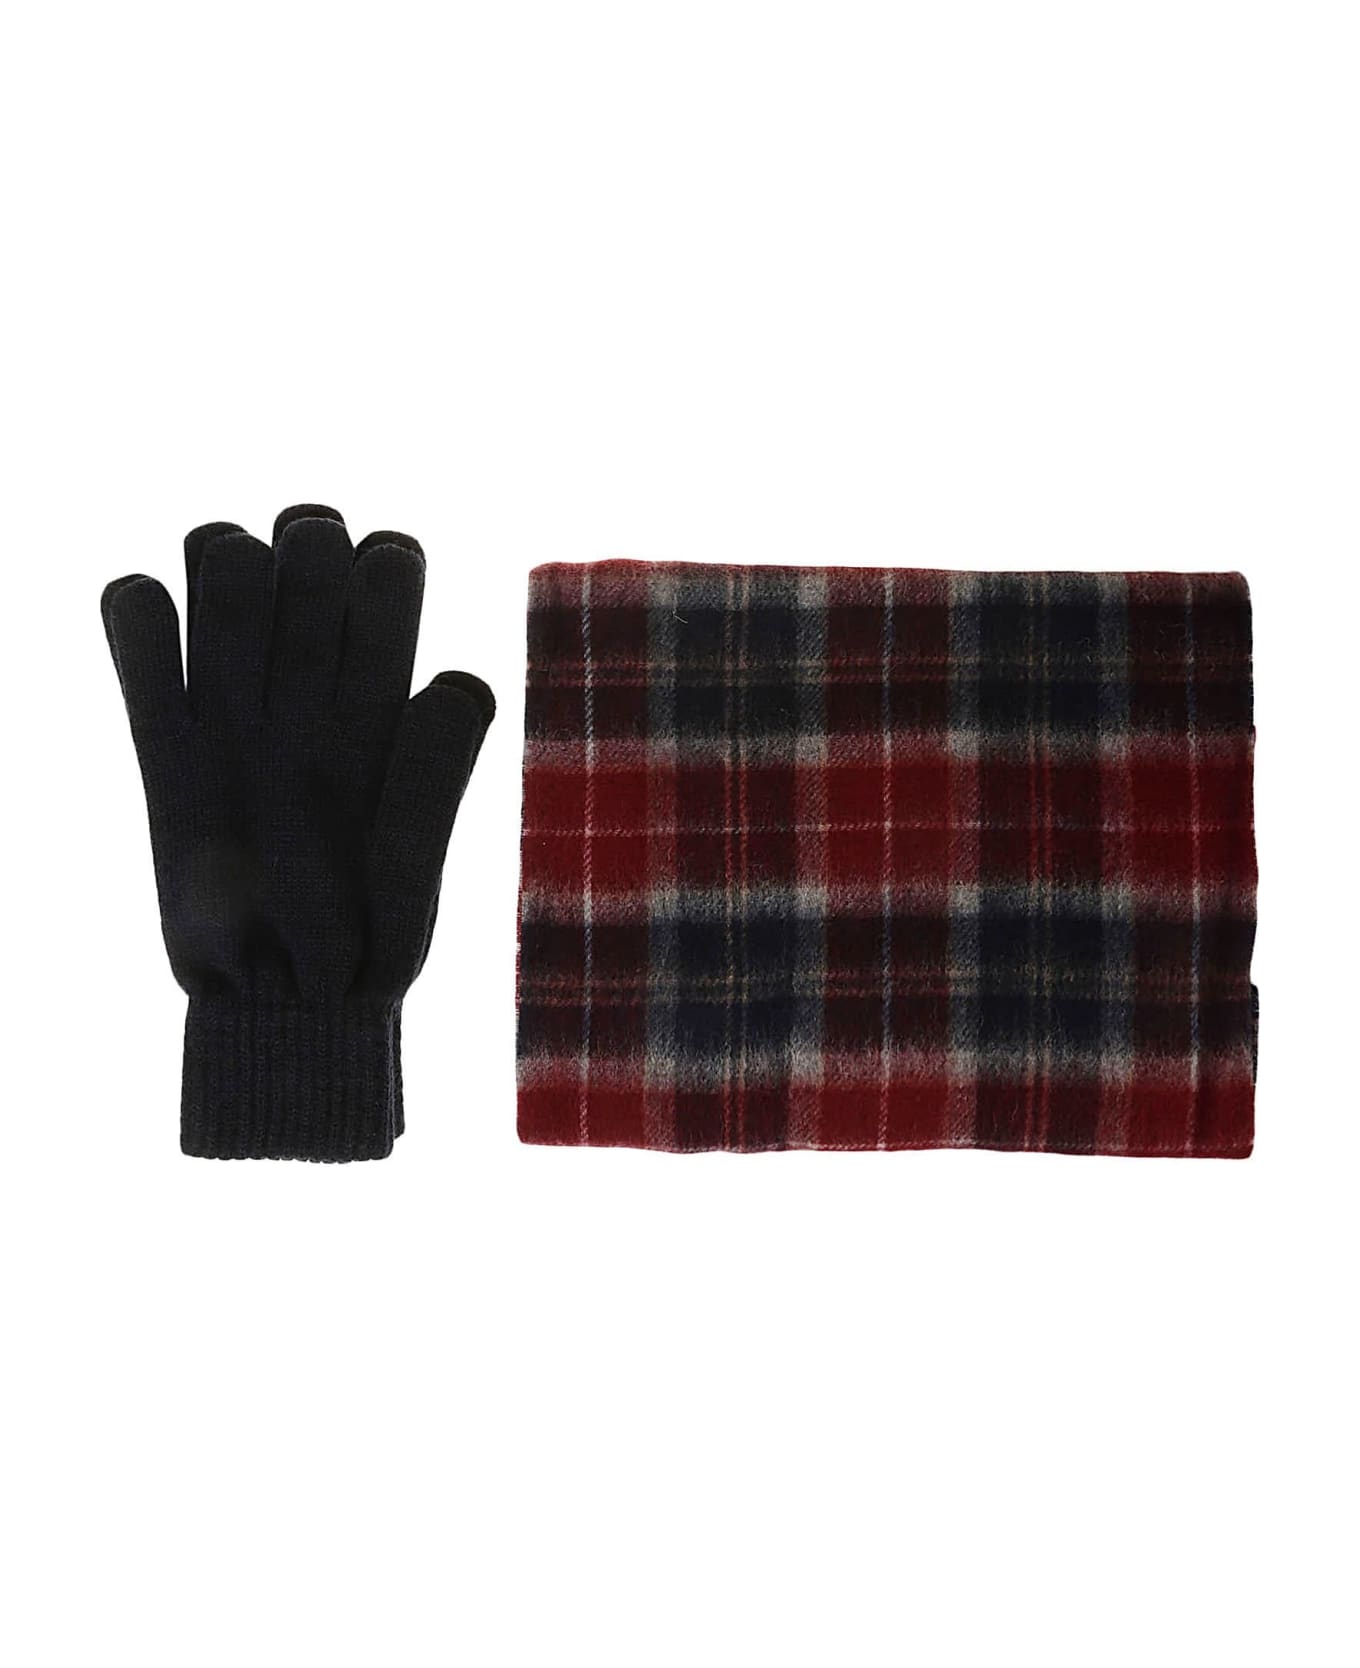 Barbour Scarf And Gloves Gift Set - Cranberry